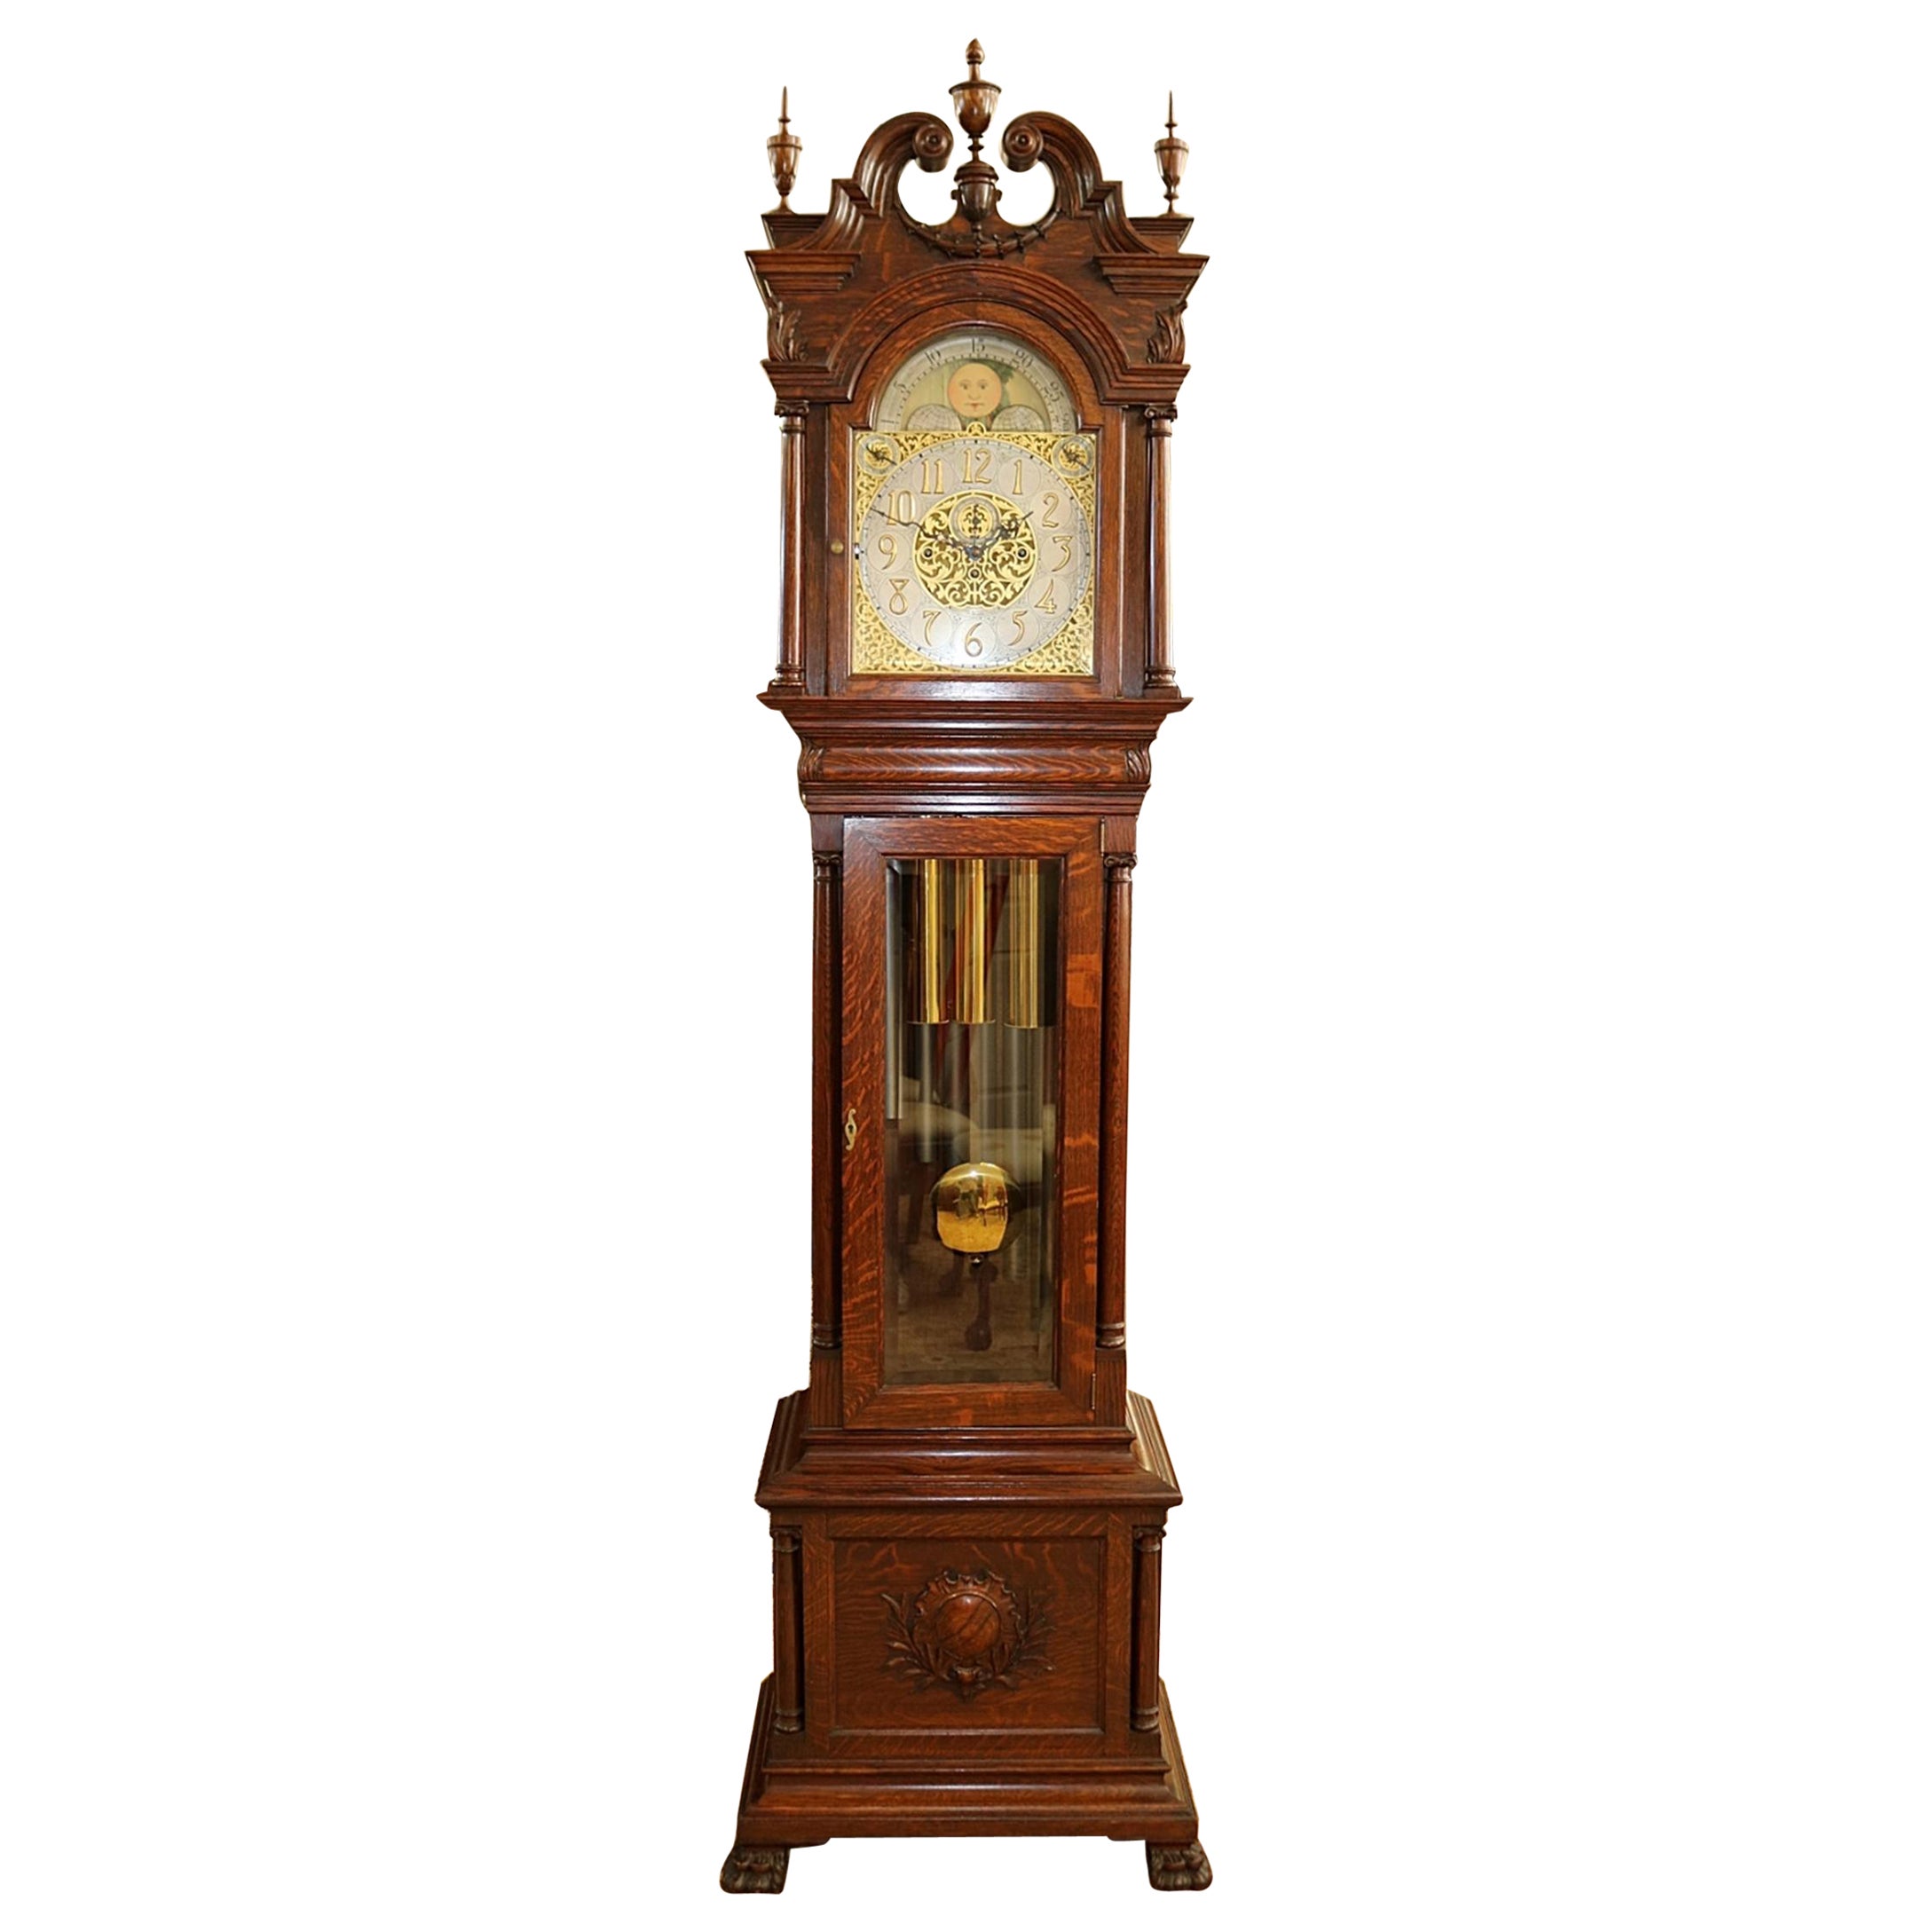 What is a tube grandfather clock?